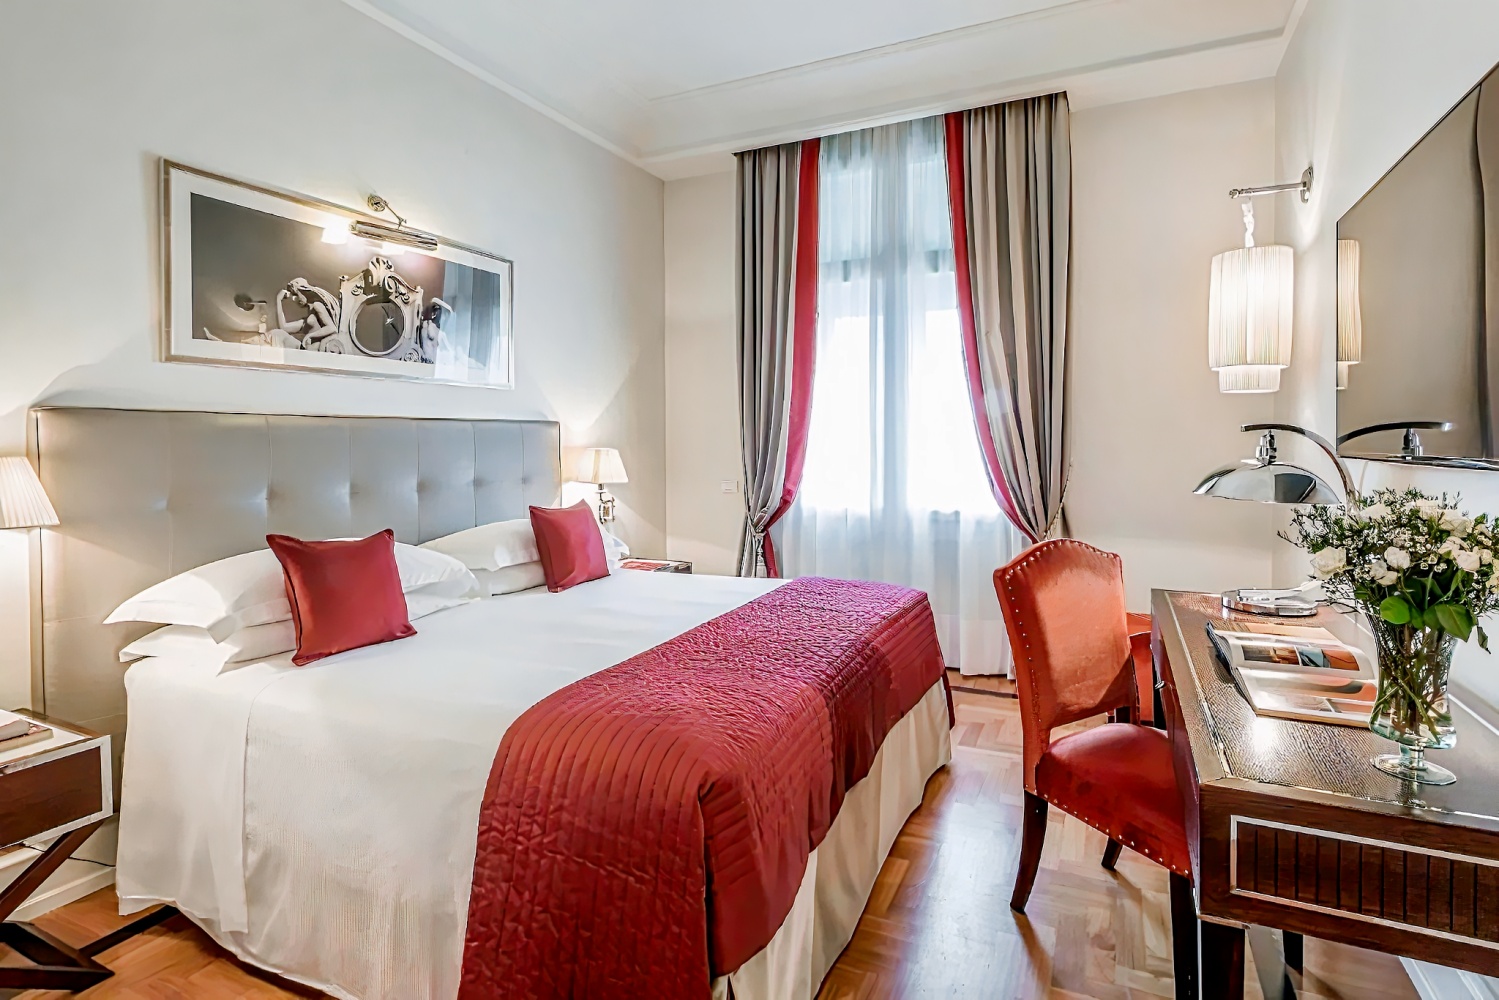 Savoia Excelsior Palace Trieste – Starhotels Collezione